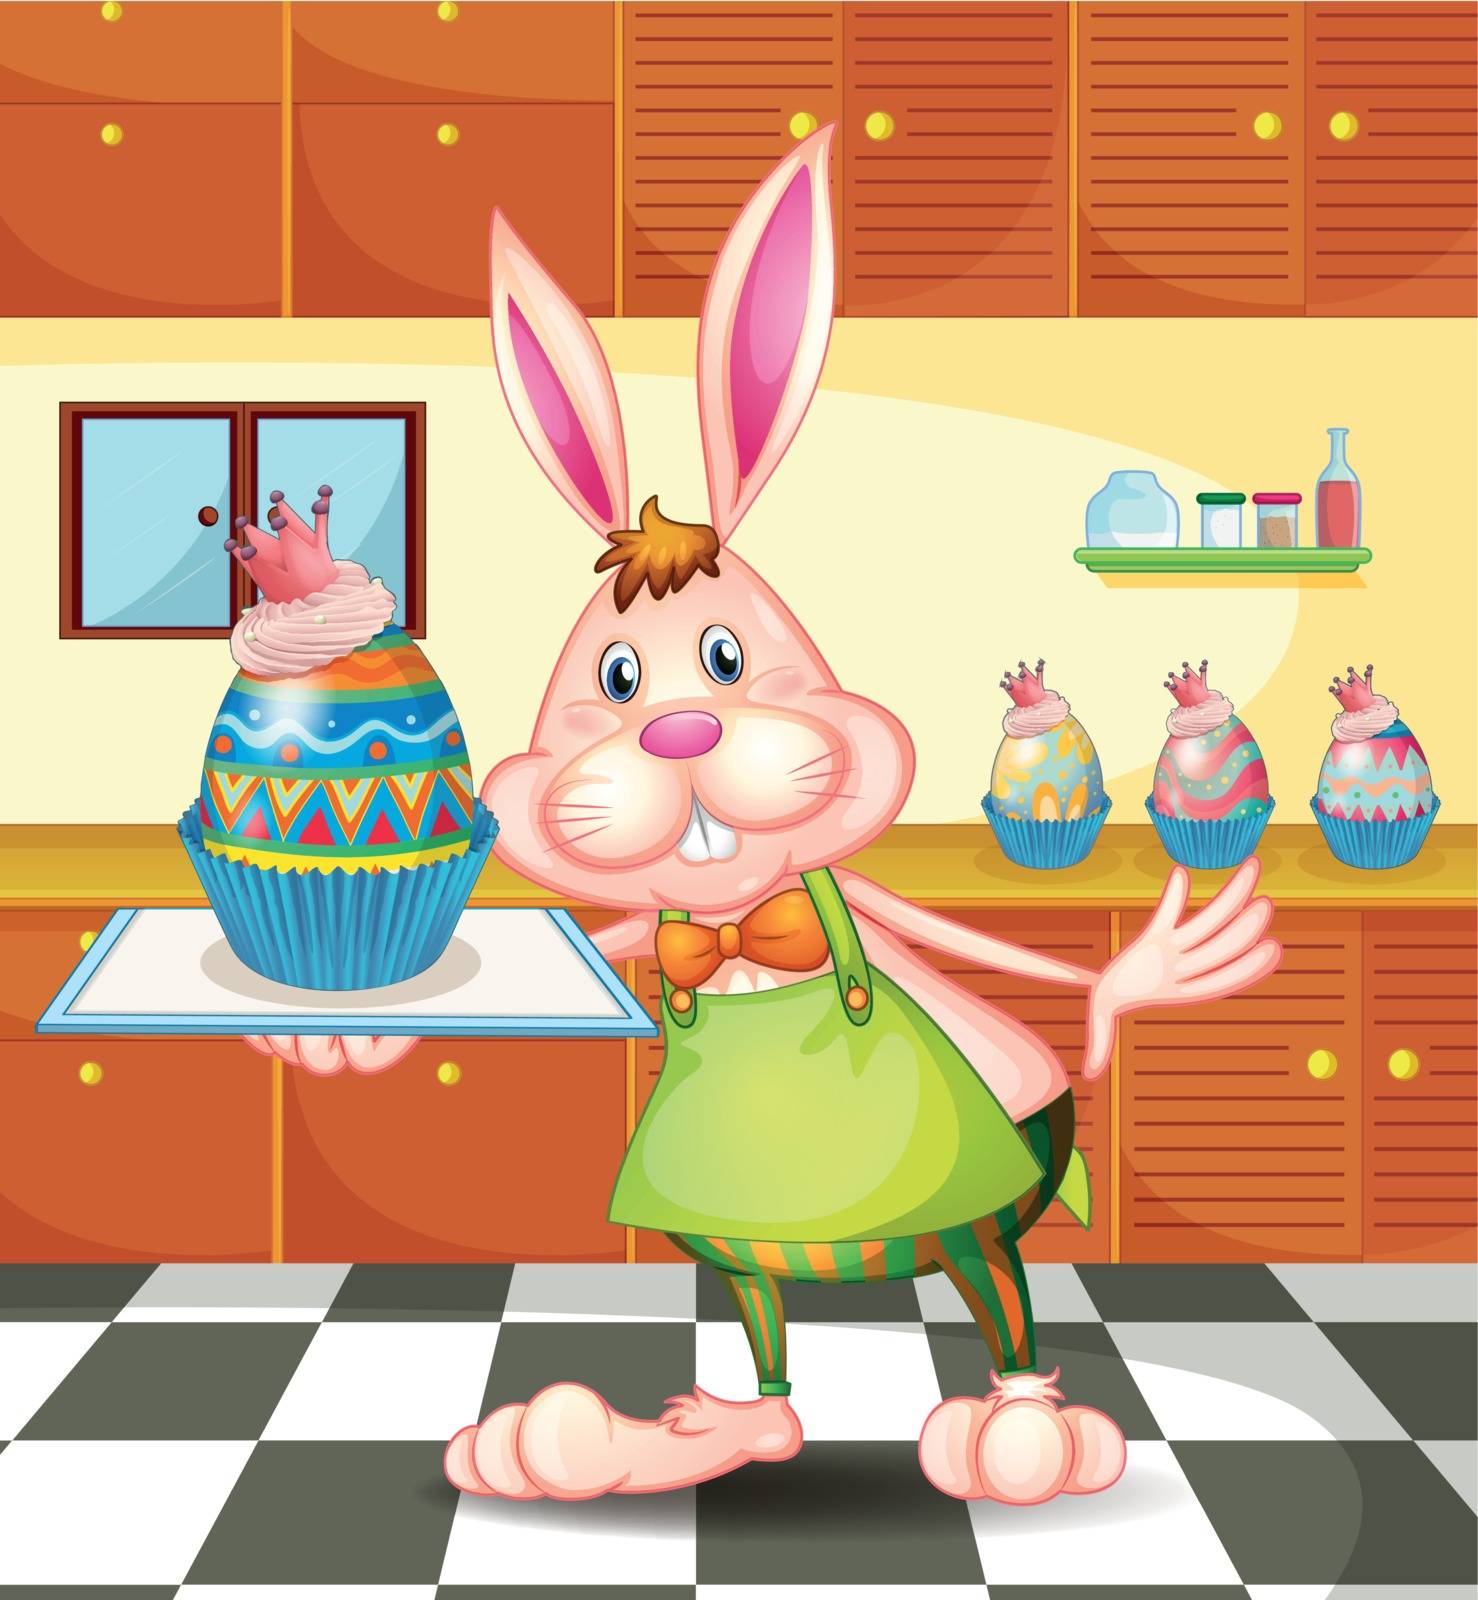 Illustration of a bunny baking an egg-designed cupcakes